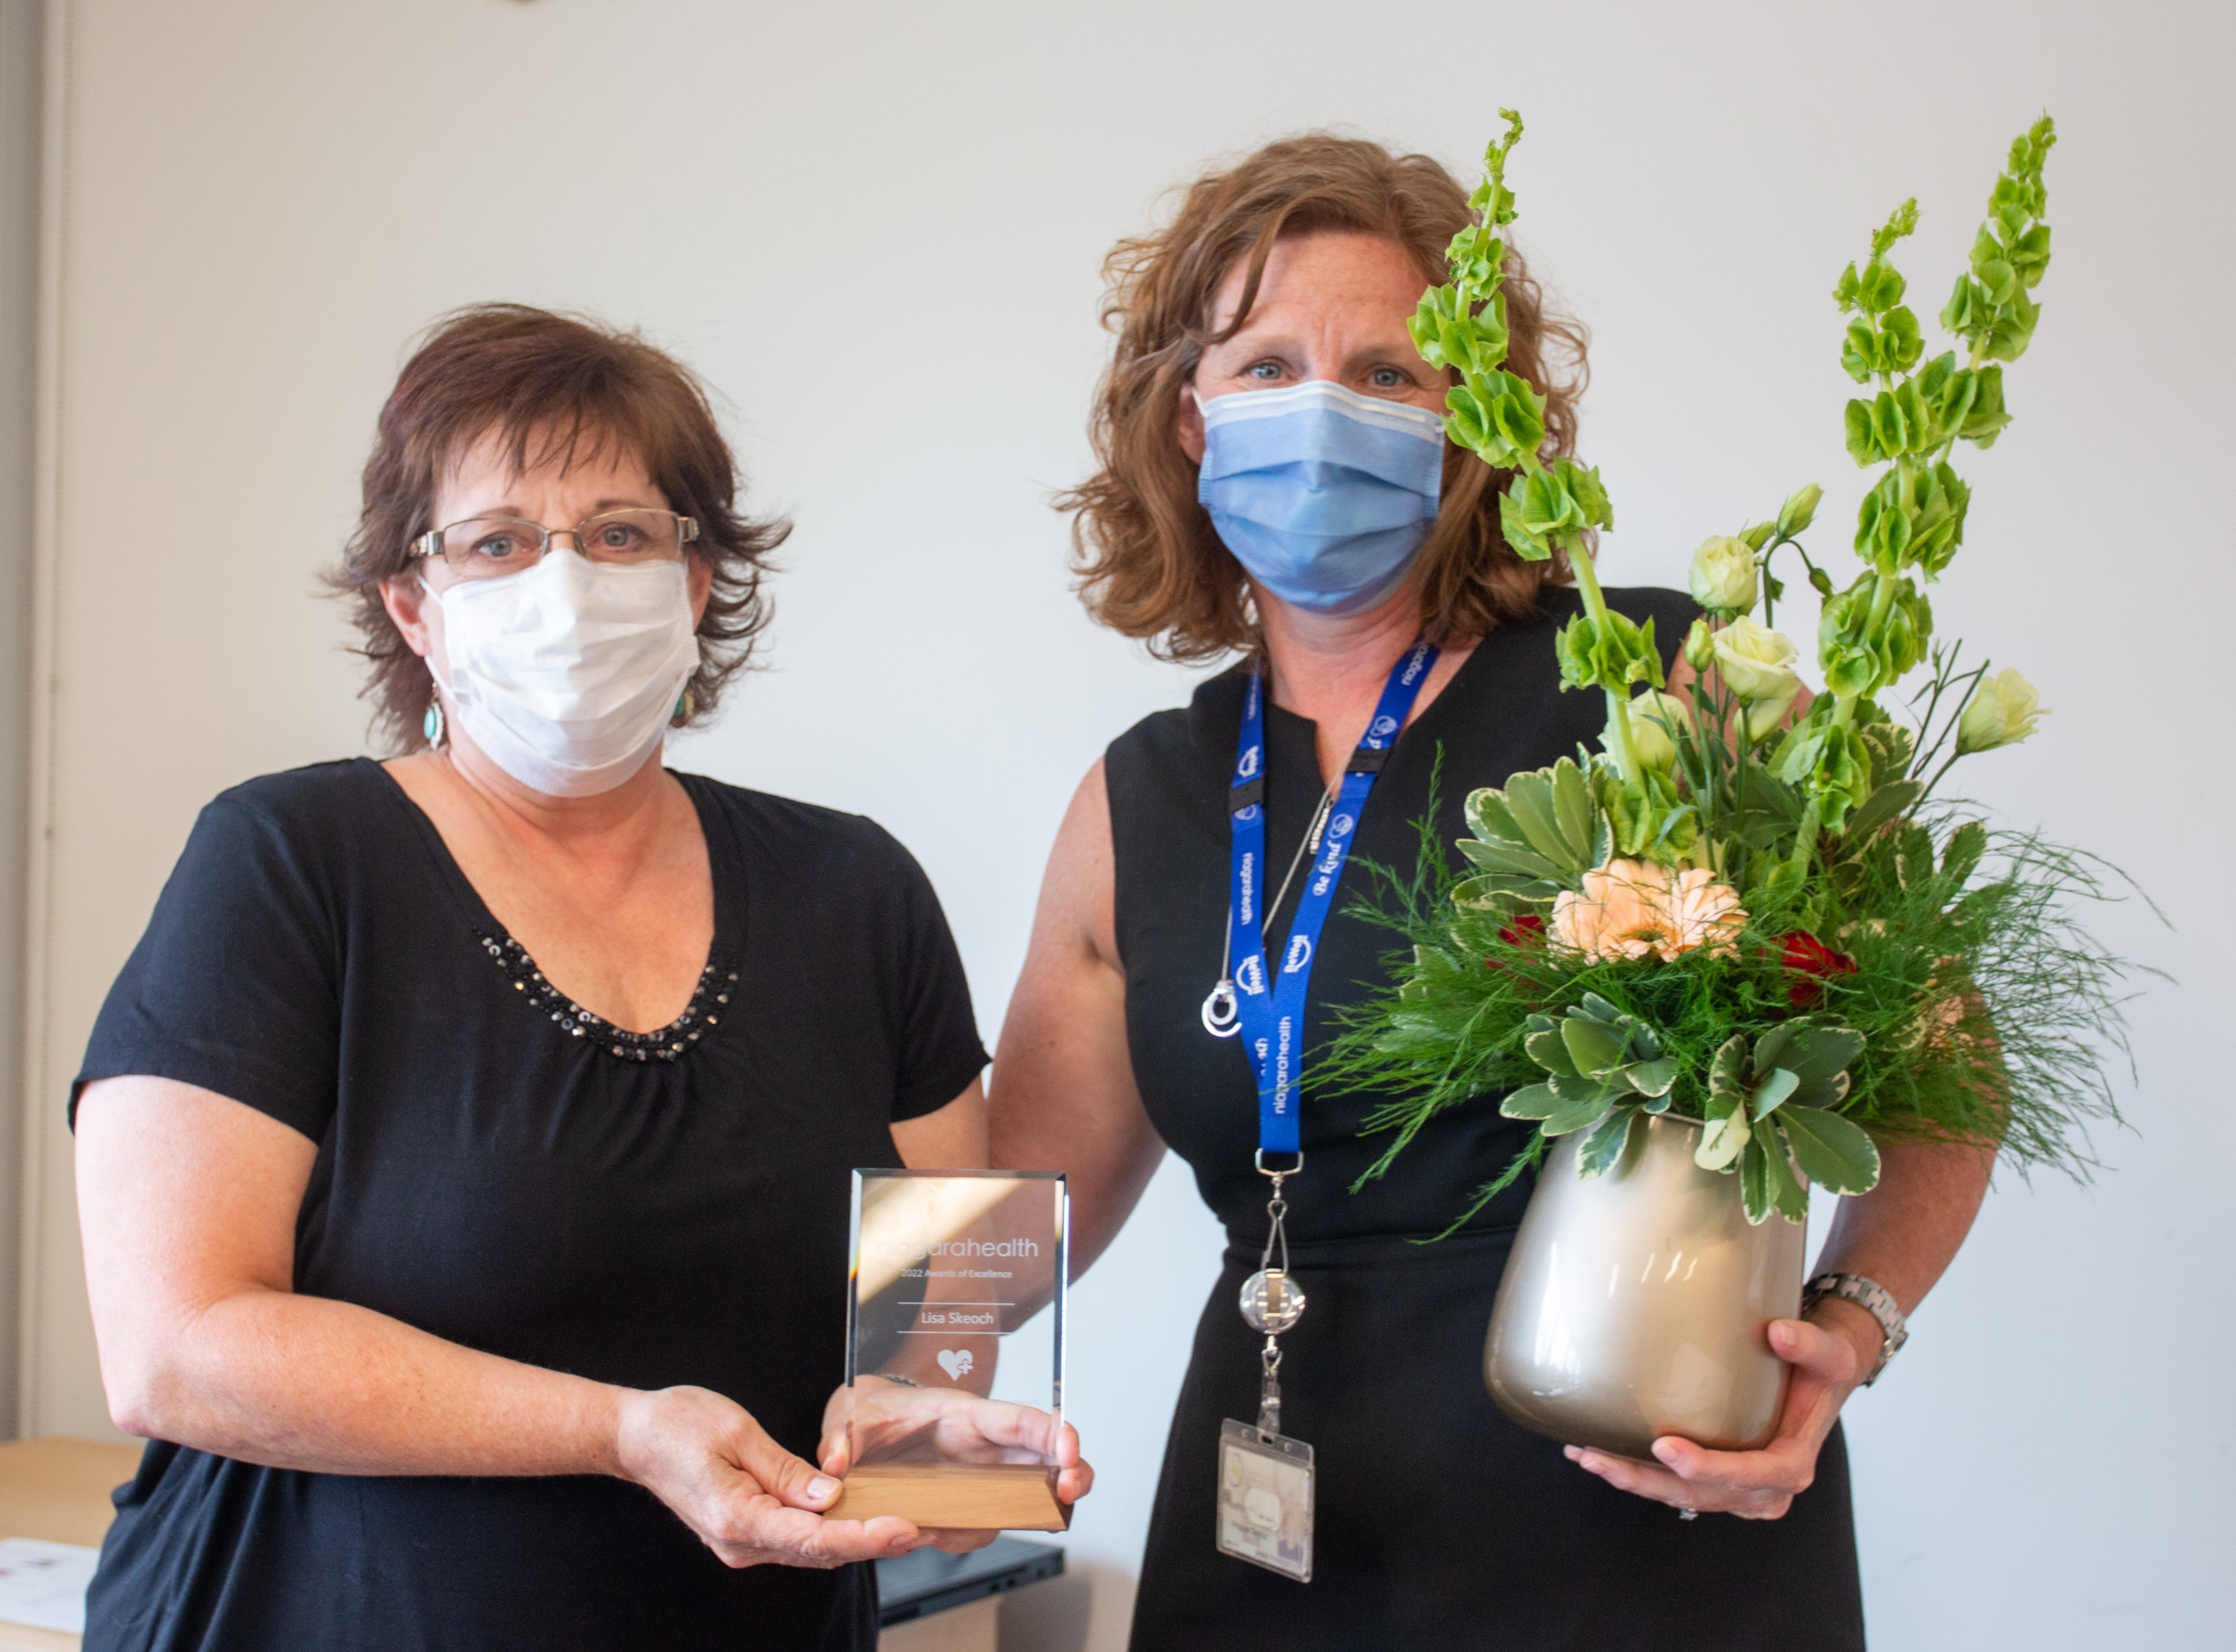 Two women stand together. One holds an award, the other holds flowers. They are wearing masks and smiling.